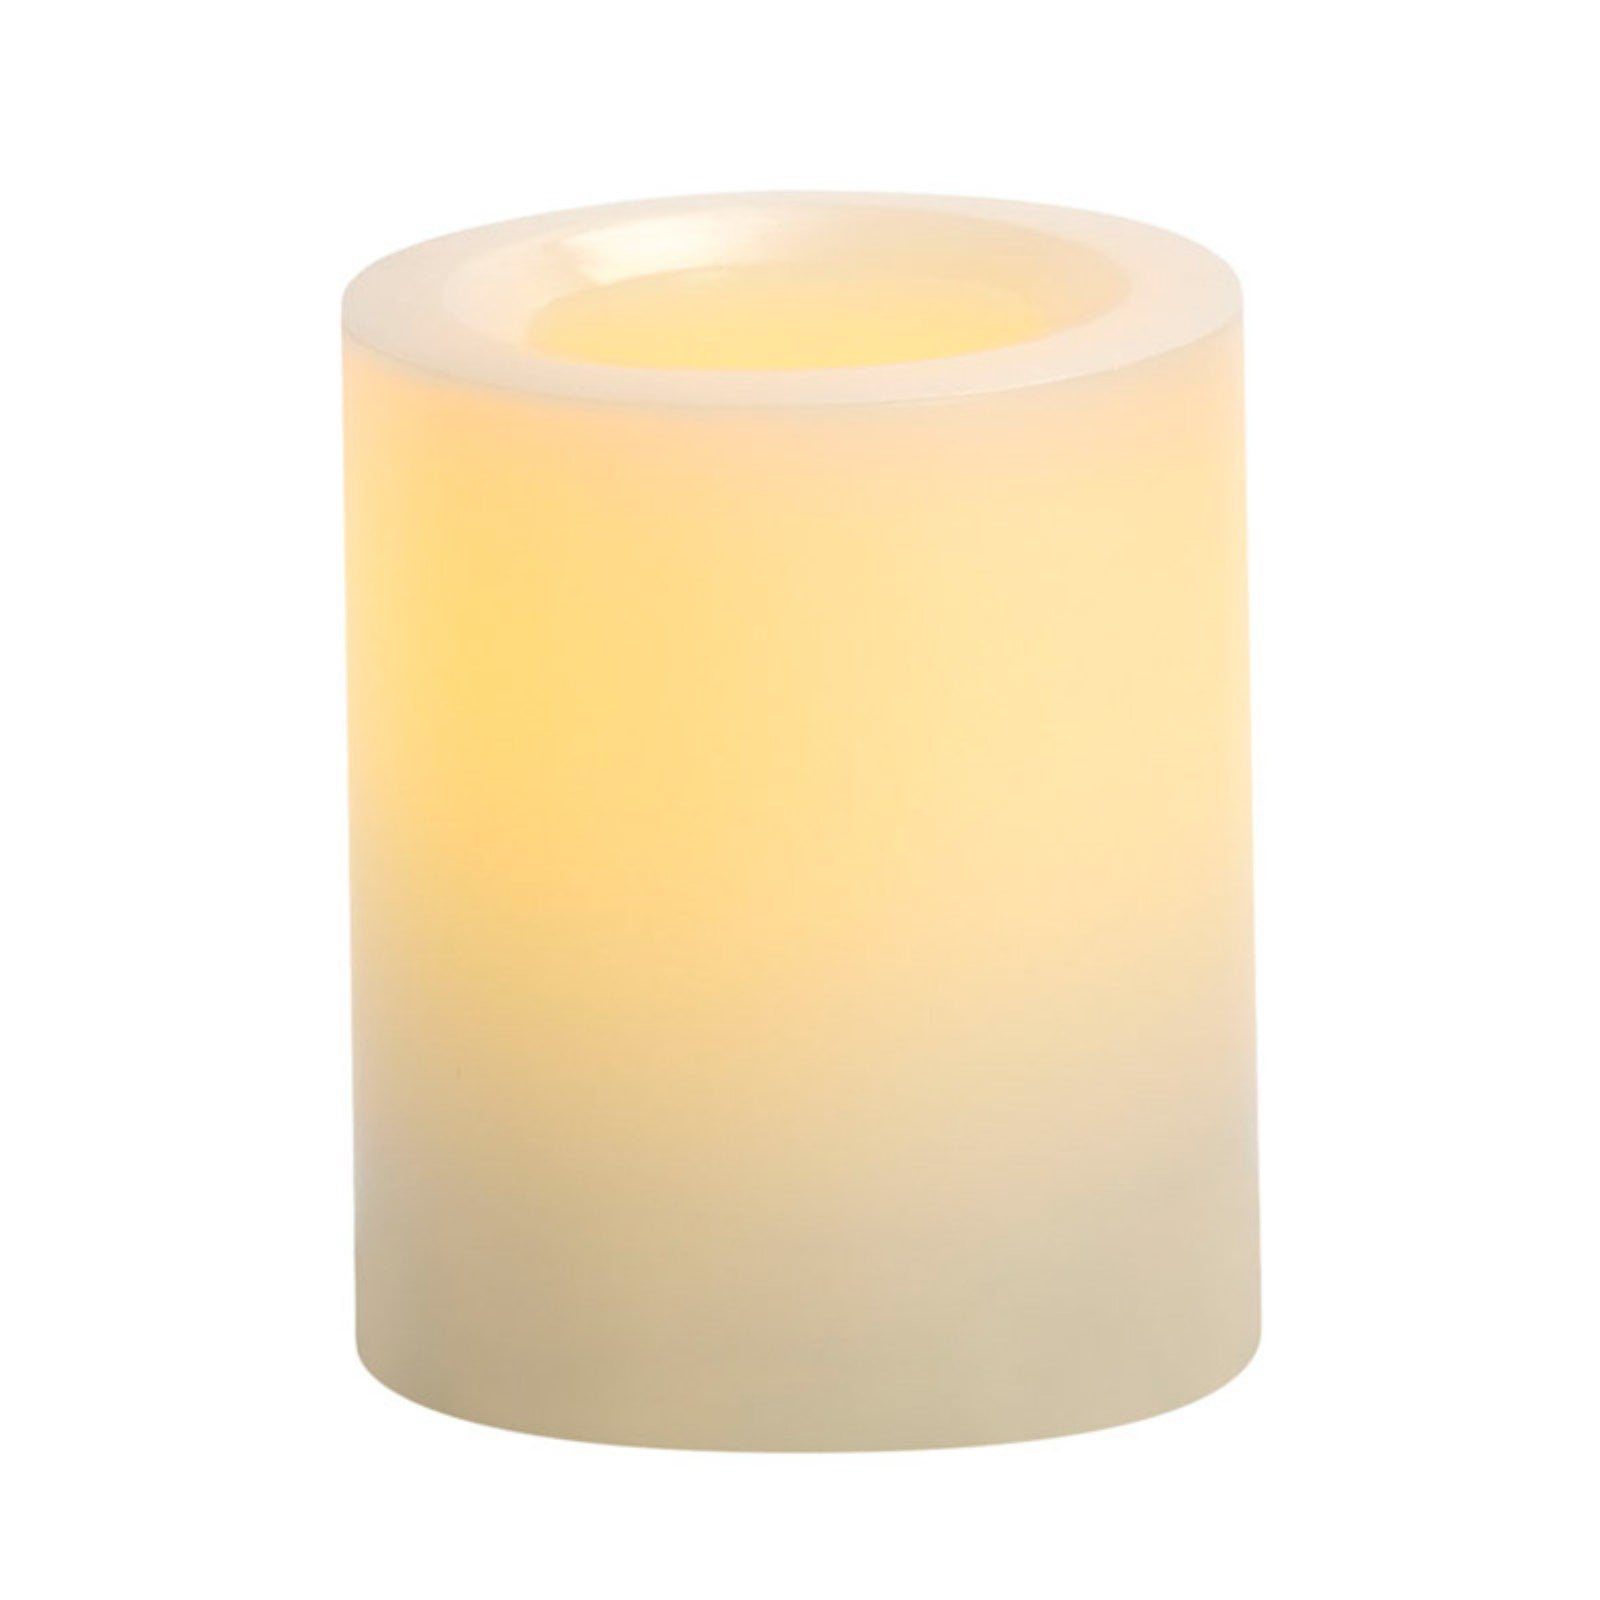 Candle Impressions Flameless Pillar Candle w/Fragrance Top-Everyday 